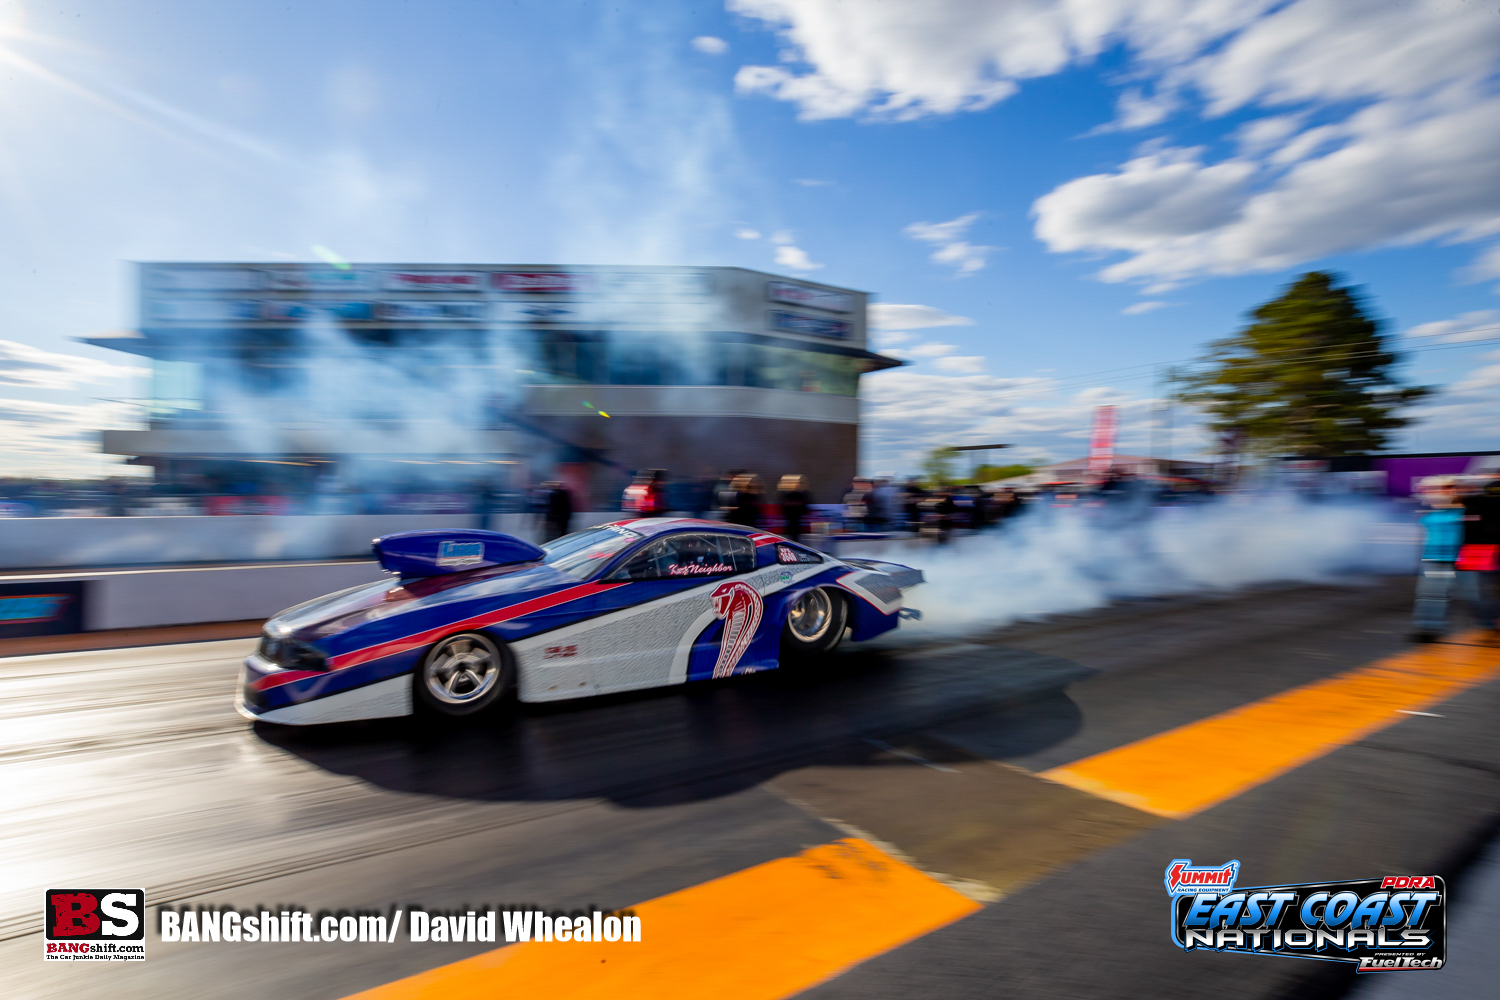 PDRA 2024 East Coast Nationals Action Photos: Dragsters, Door Cars, And All The Tire Smoking Wheelstanding Action Shots!